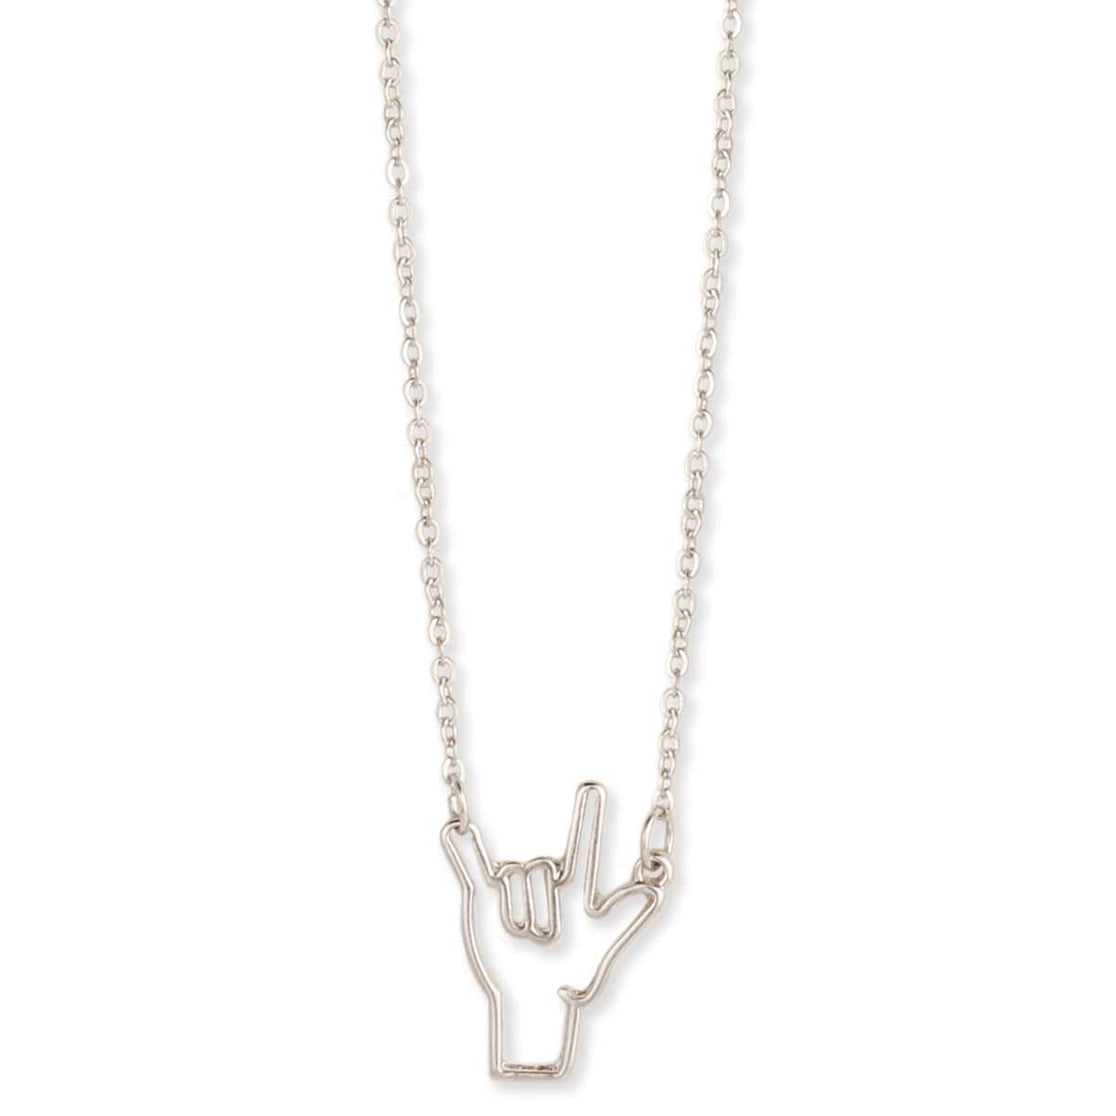 I Love You Hand Necklace